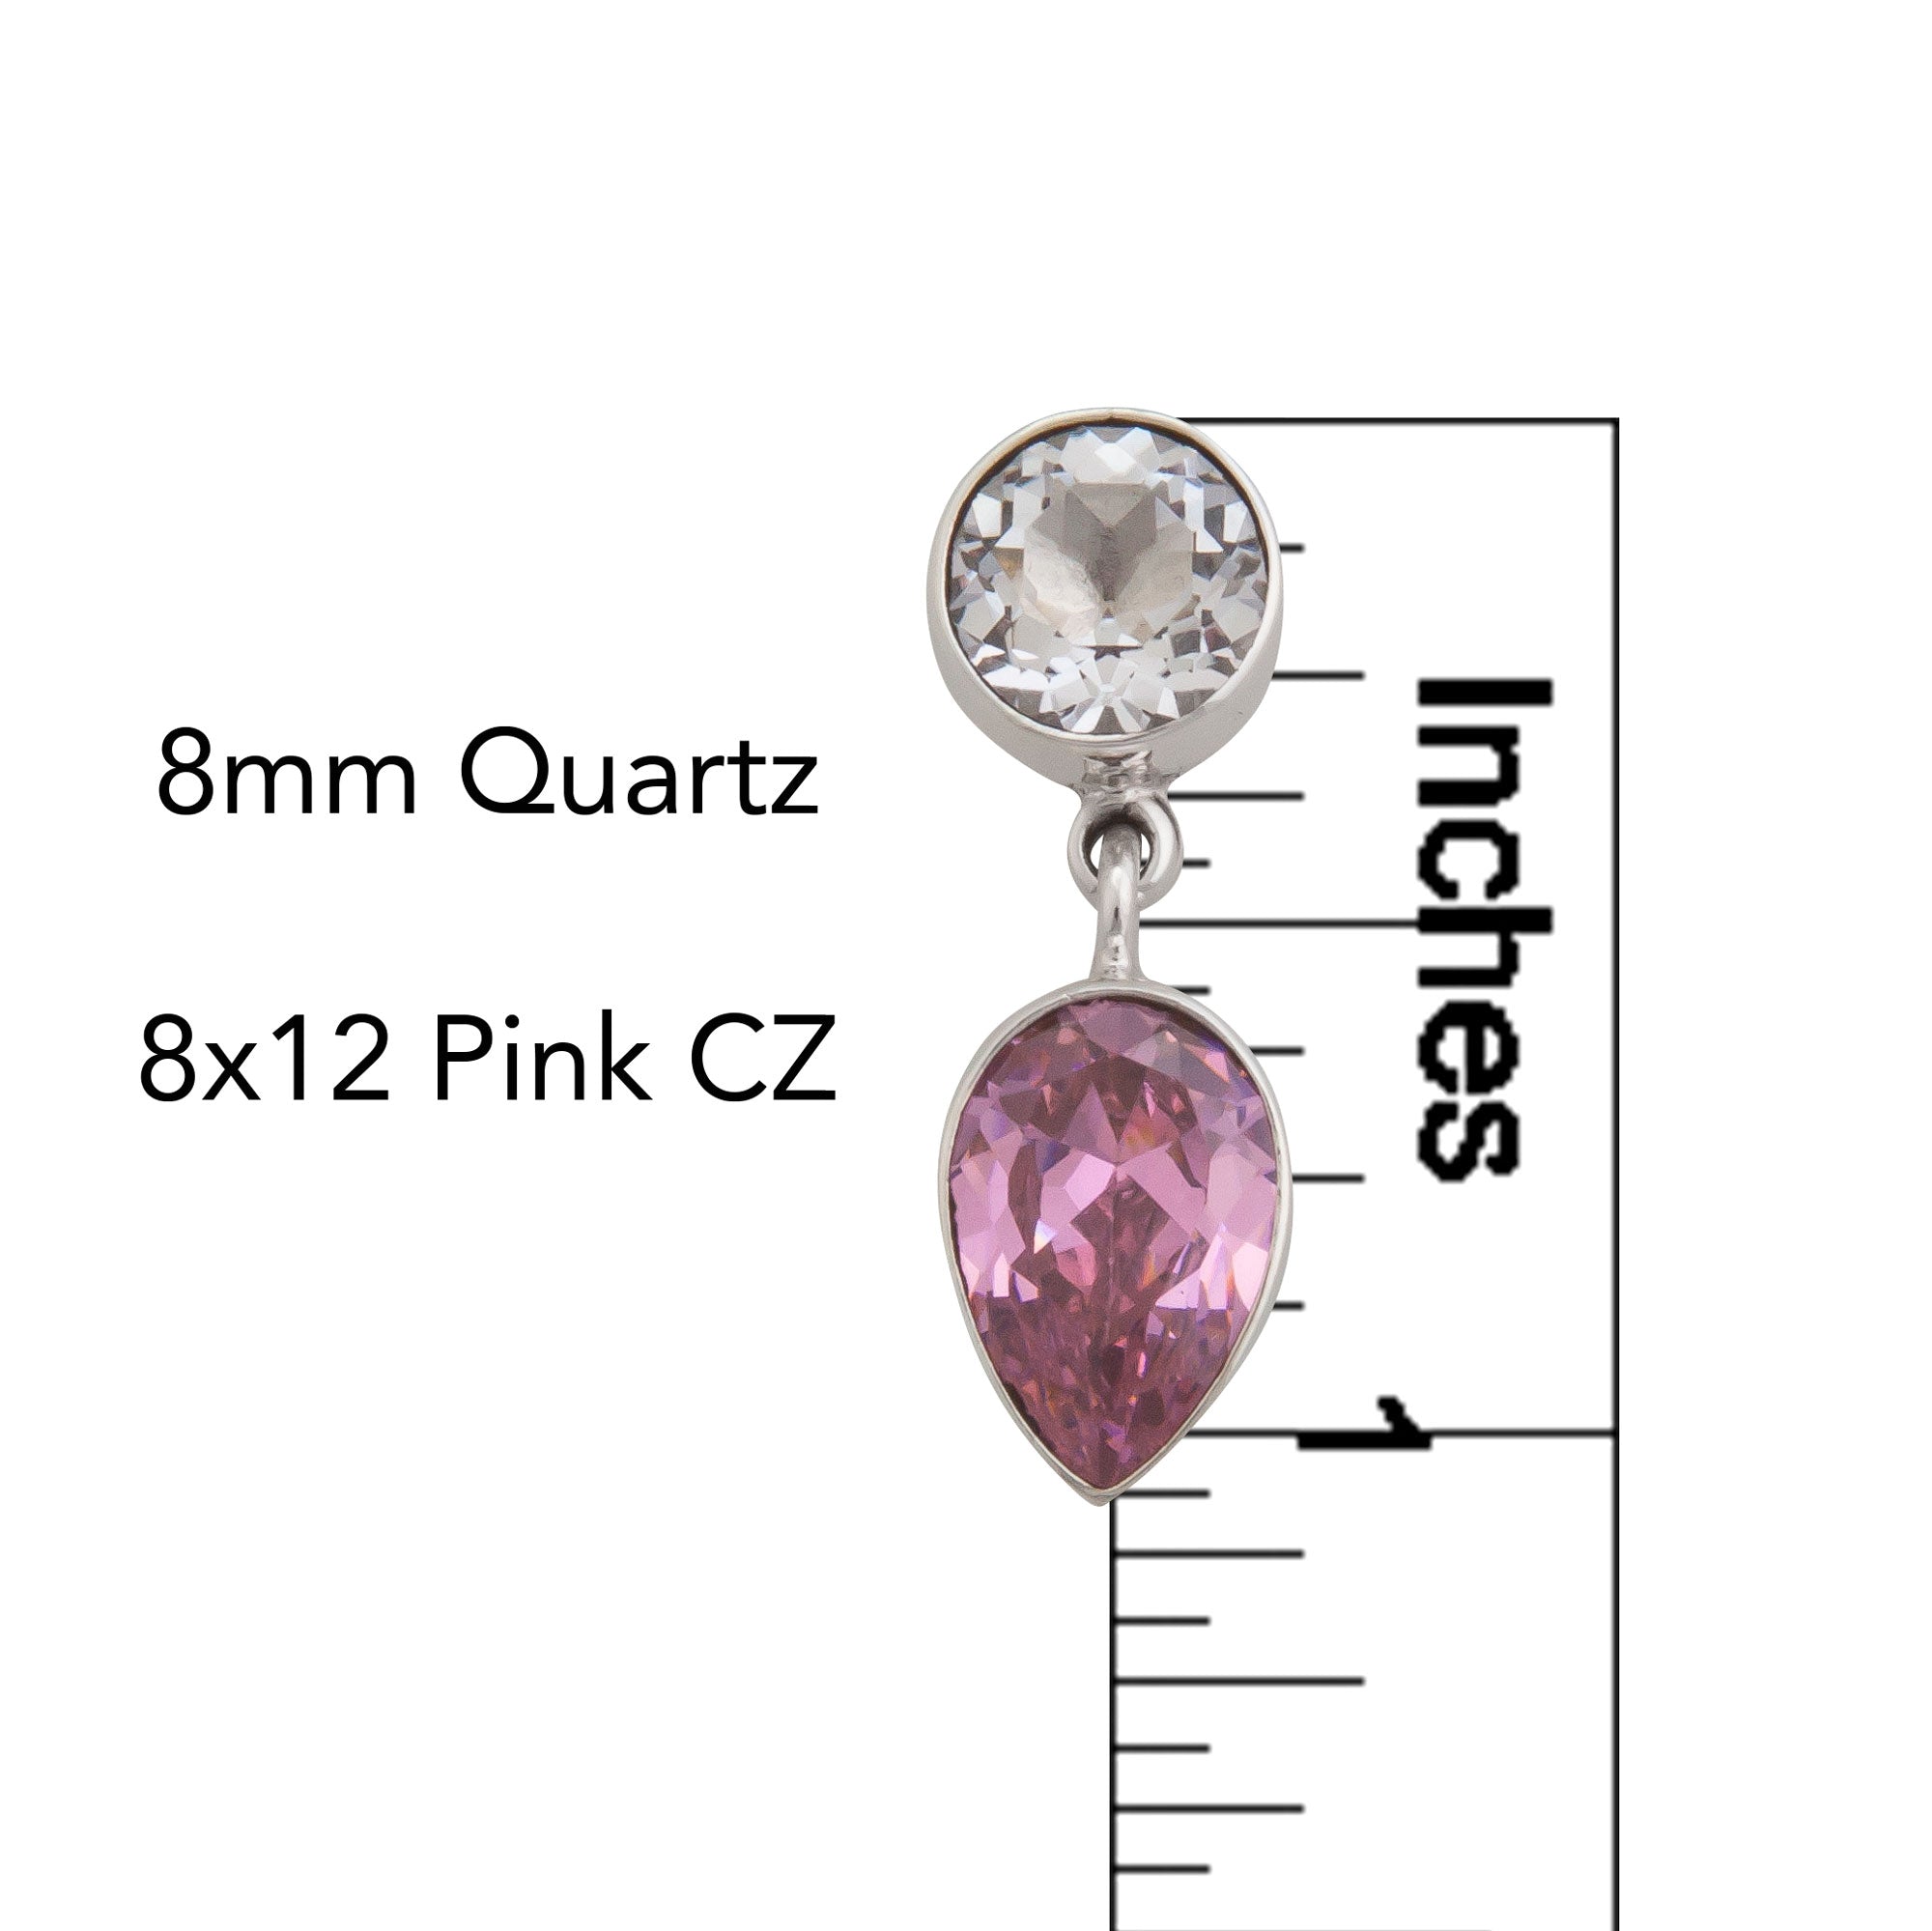 Charles Albert Jewelry - Adore Sterling Silver Quartz and Pink CZ Post Earrings - Side View